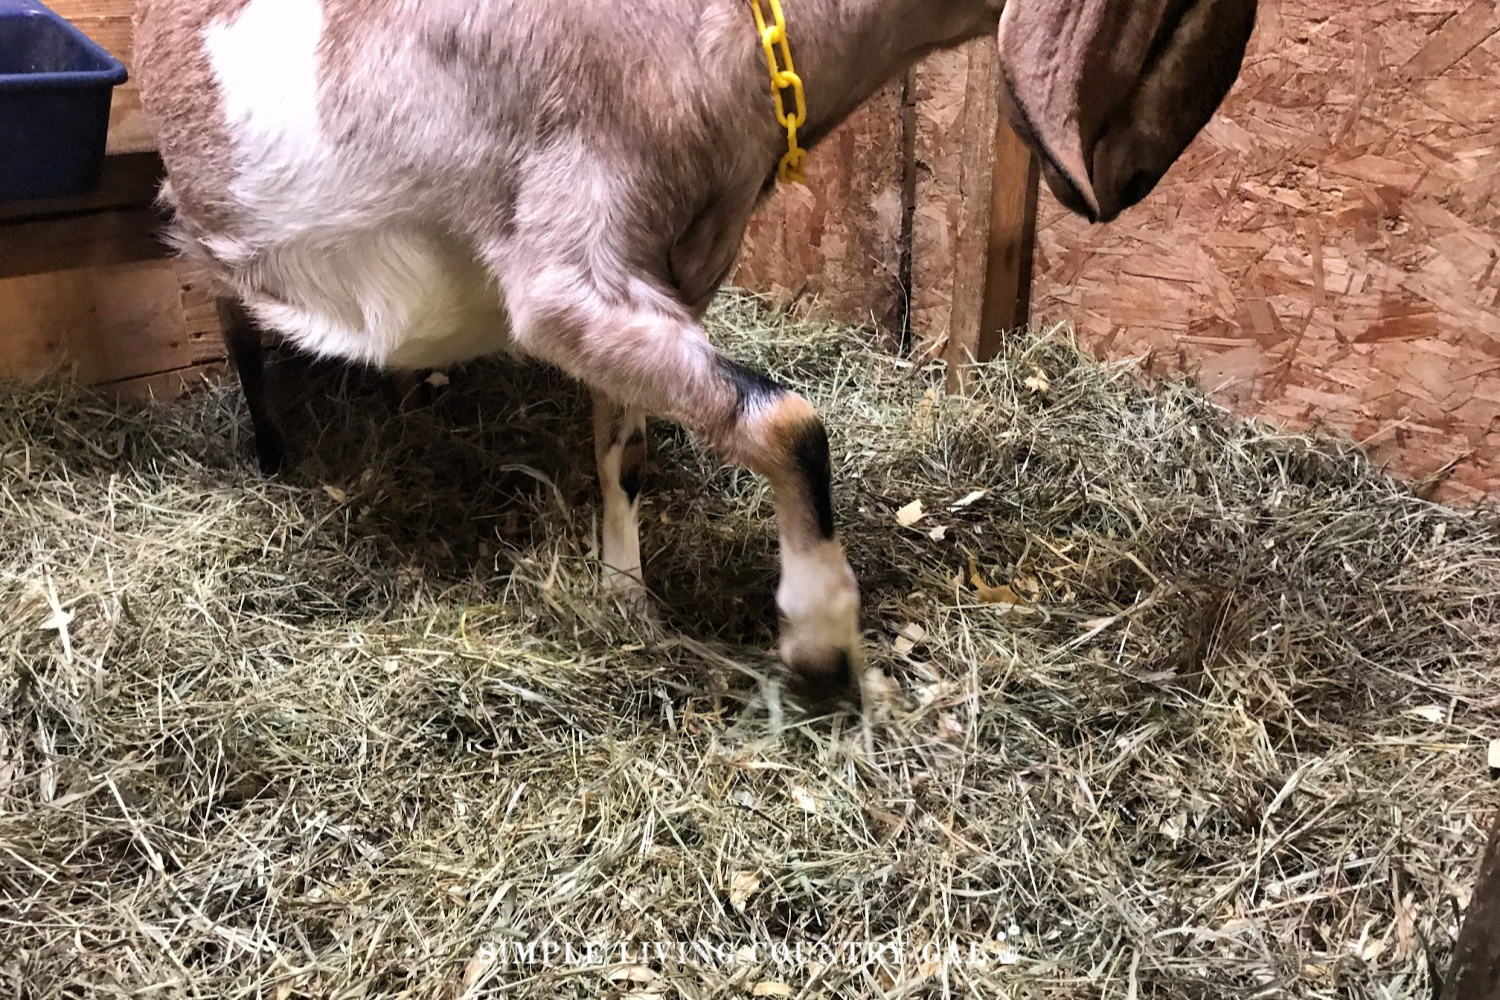 goat making a kidding bed with her hoof prior to kidding